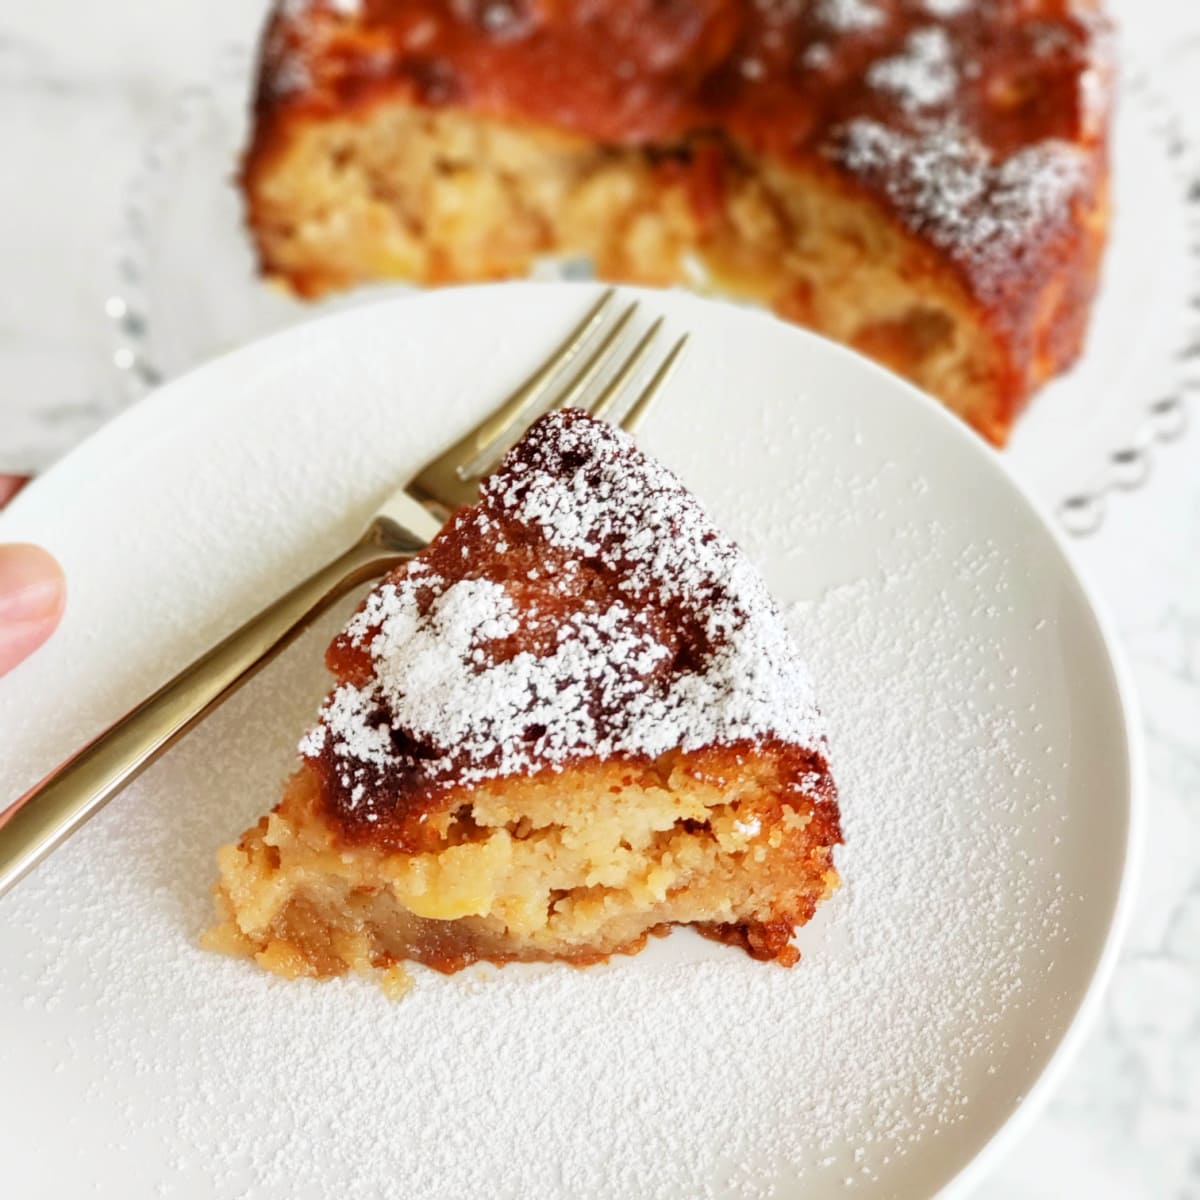 A wedge of Apple Almond Olive Oil small-batch cake on a white plate with a fork alongside